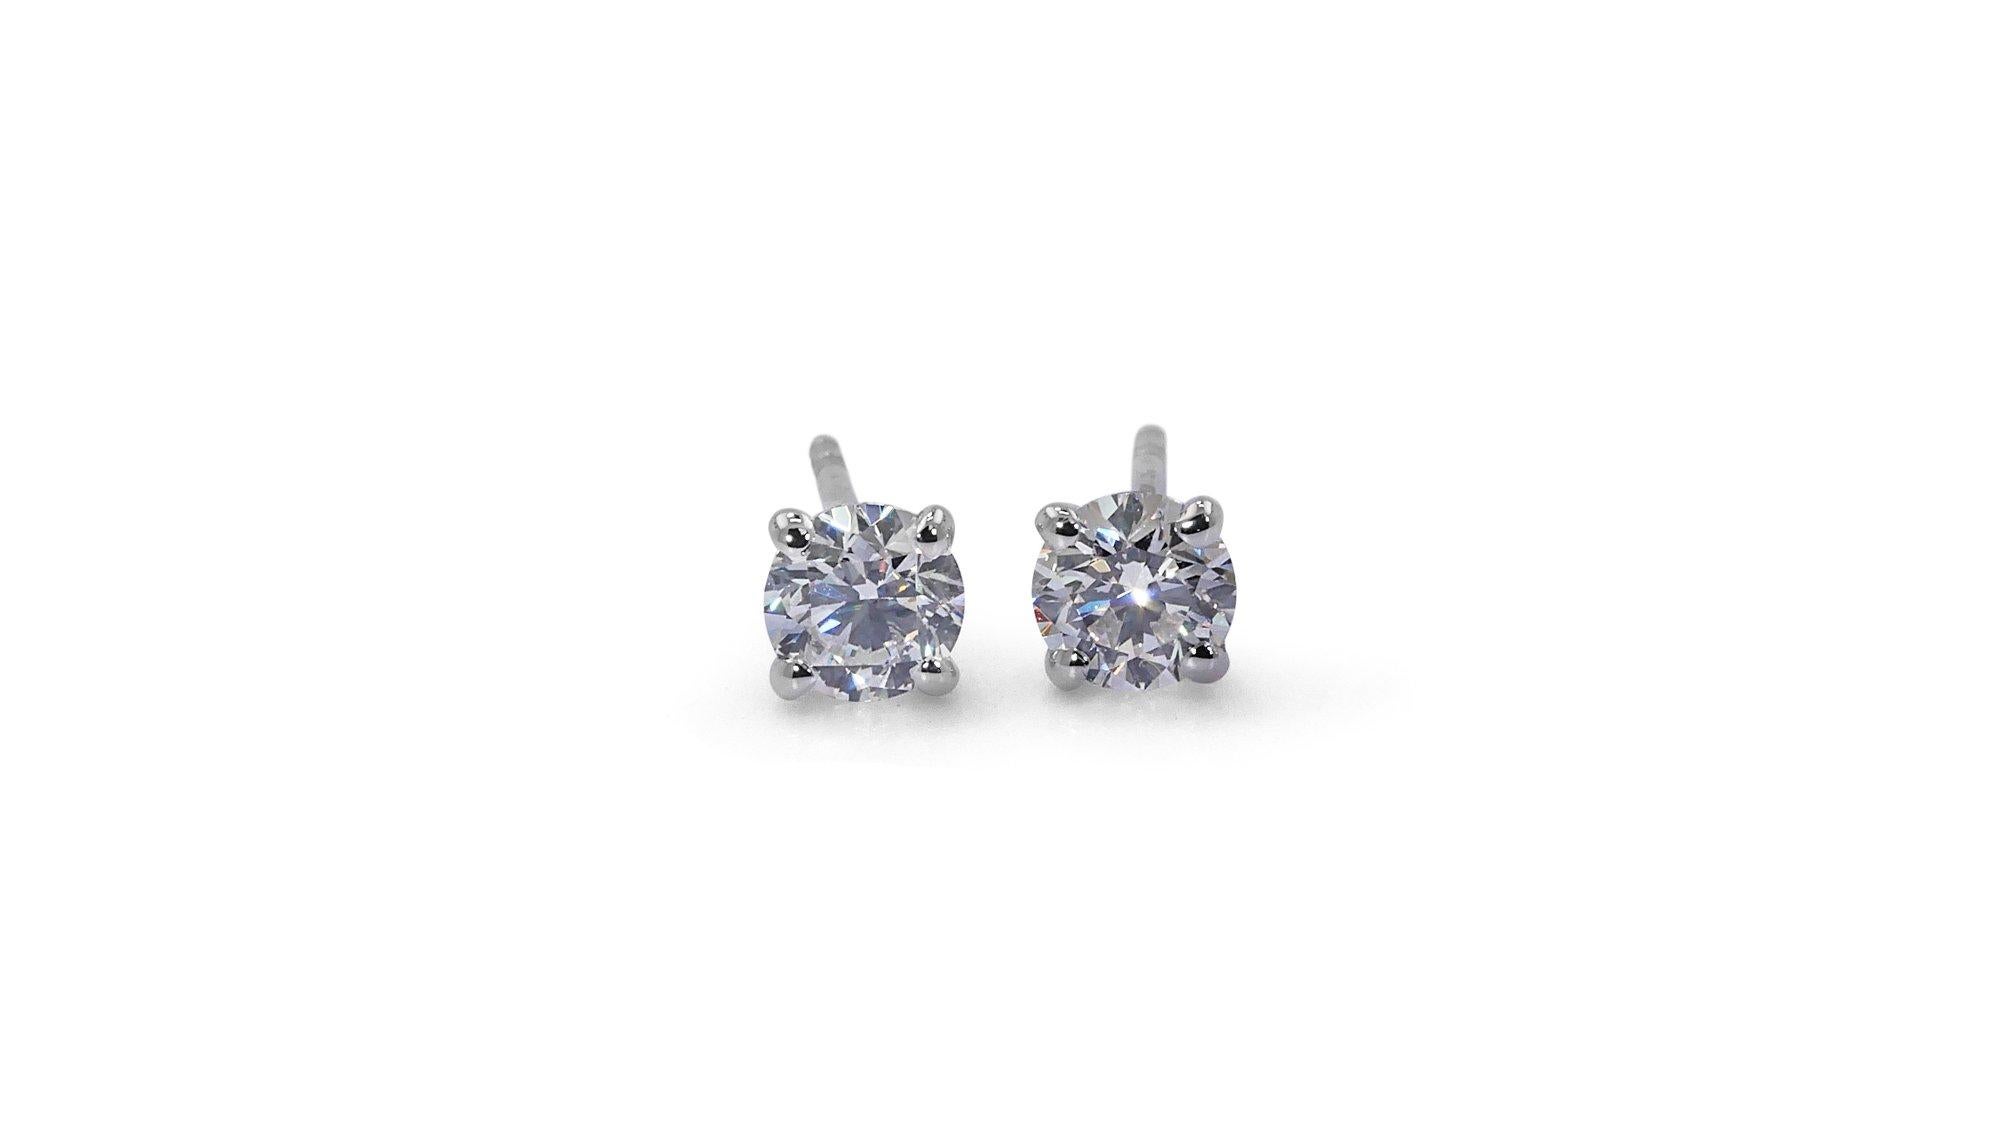 Beautiful pair of Earrings with a dazzling 0.8 carat round brilliant diamonds. The jewelry is made of 18K White Gold with a high-quality polish. It comes with a GIA certificate and a fancy jewelry box.

2 diamonds main stone of 0.8 carat
cut: round